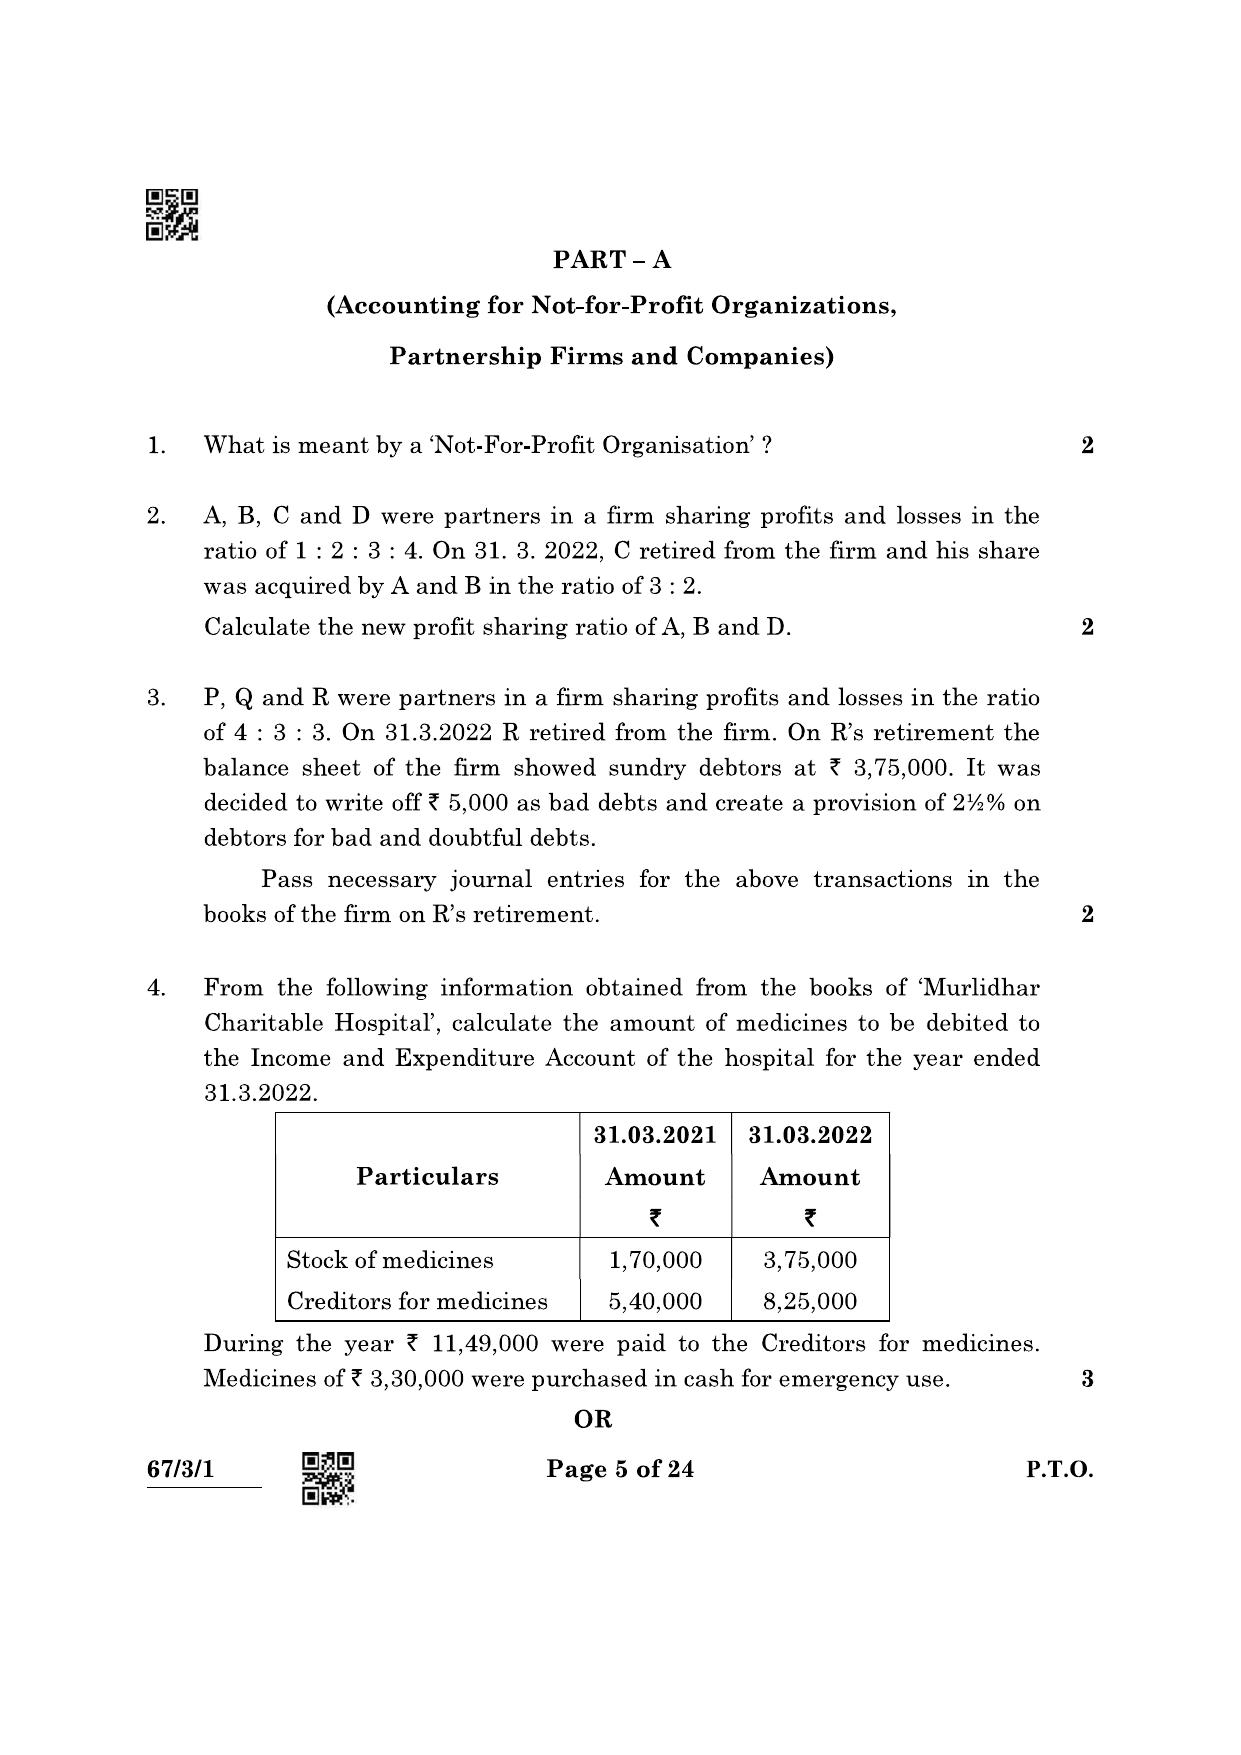 CBSE Class 12 67-3-1 Accountancy 2022 Question Paper - Page 5